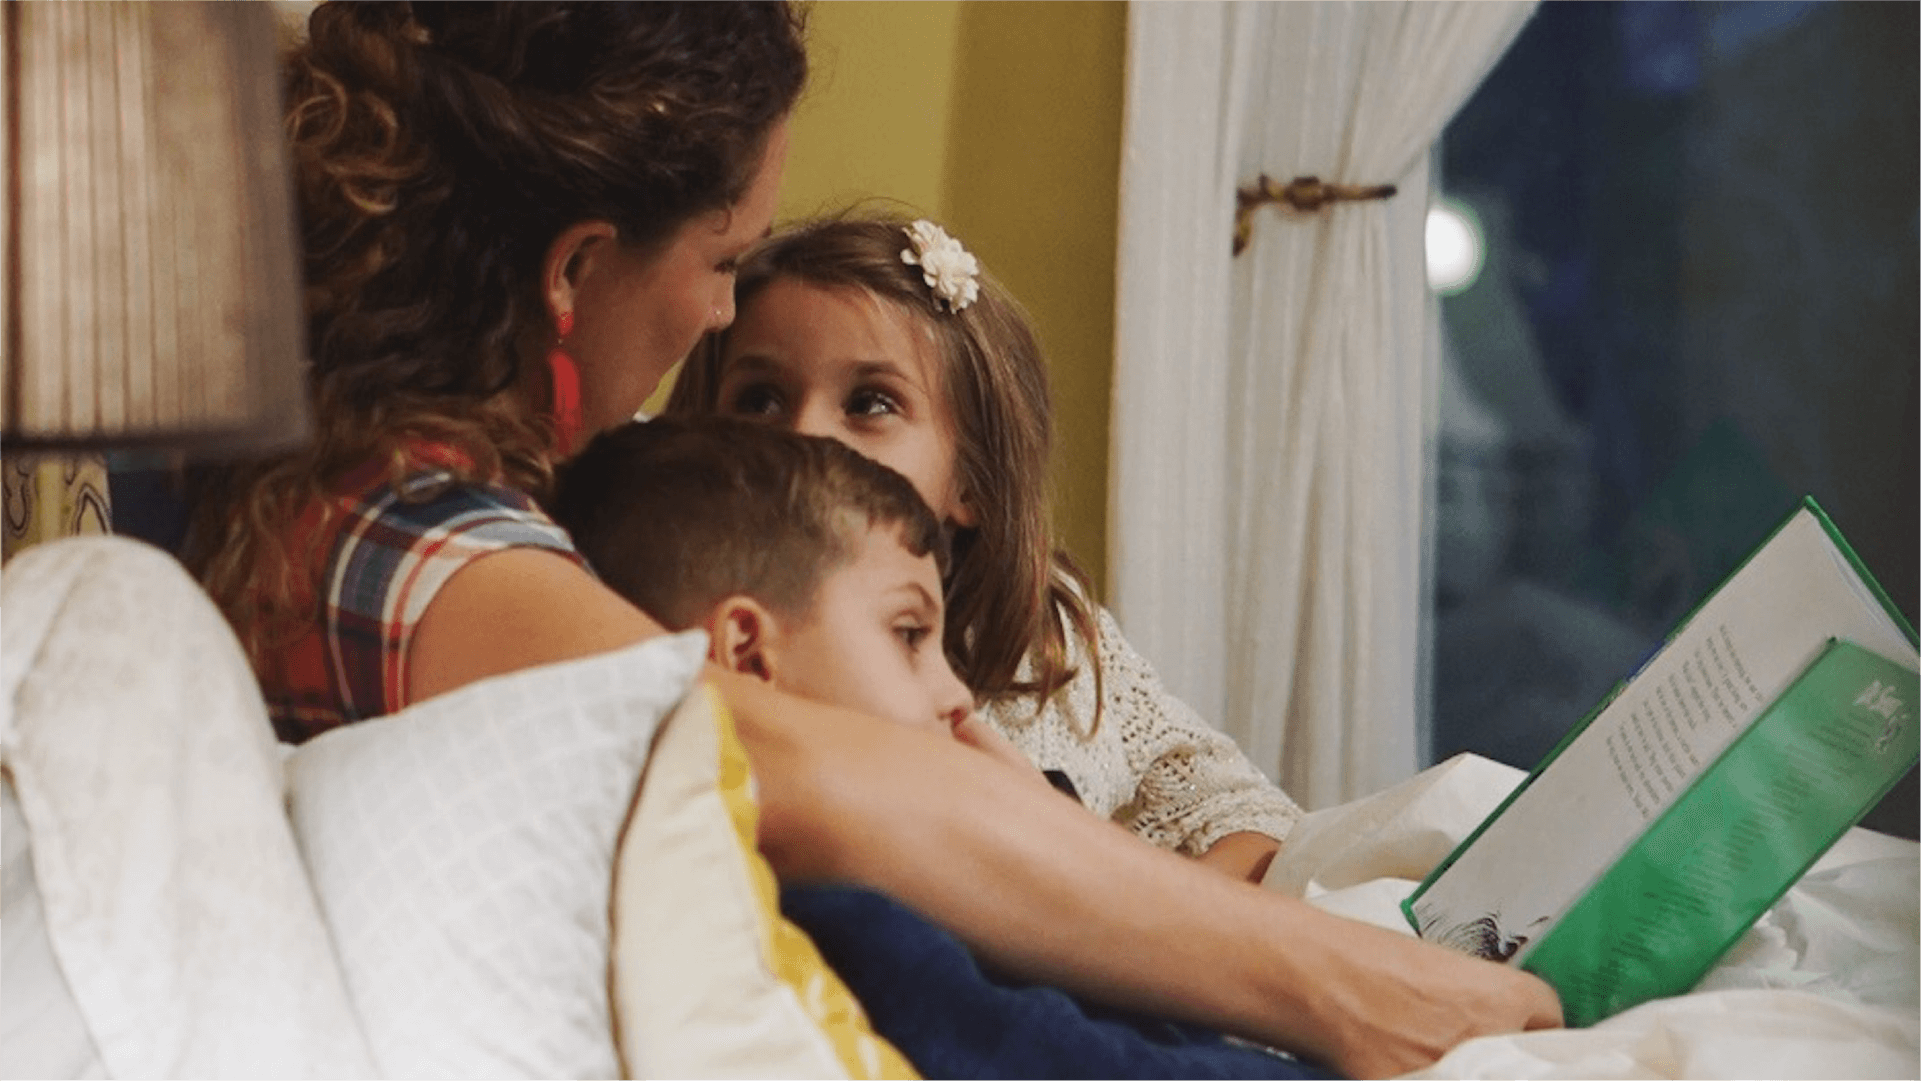 Storytime is crucial for fostering a love of reading